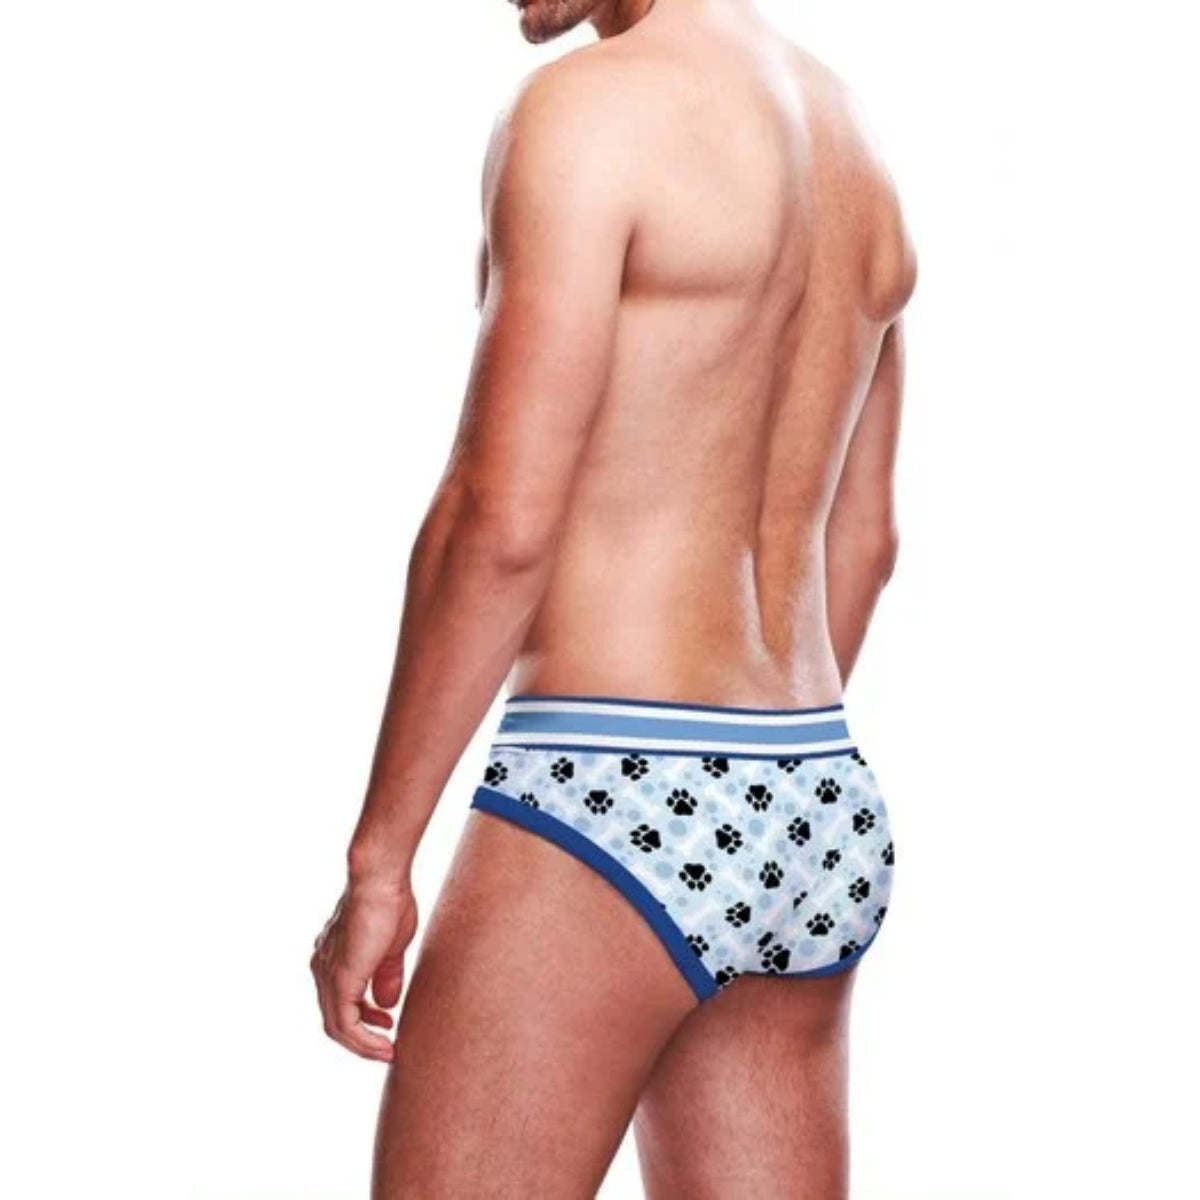 Prowler Blue Paw Brief Blue White